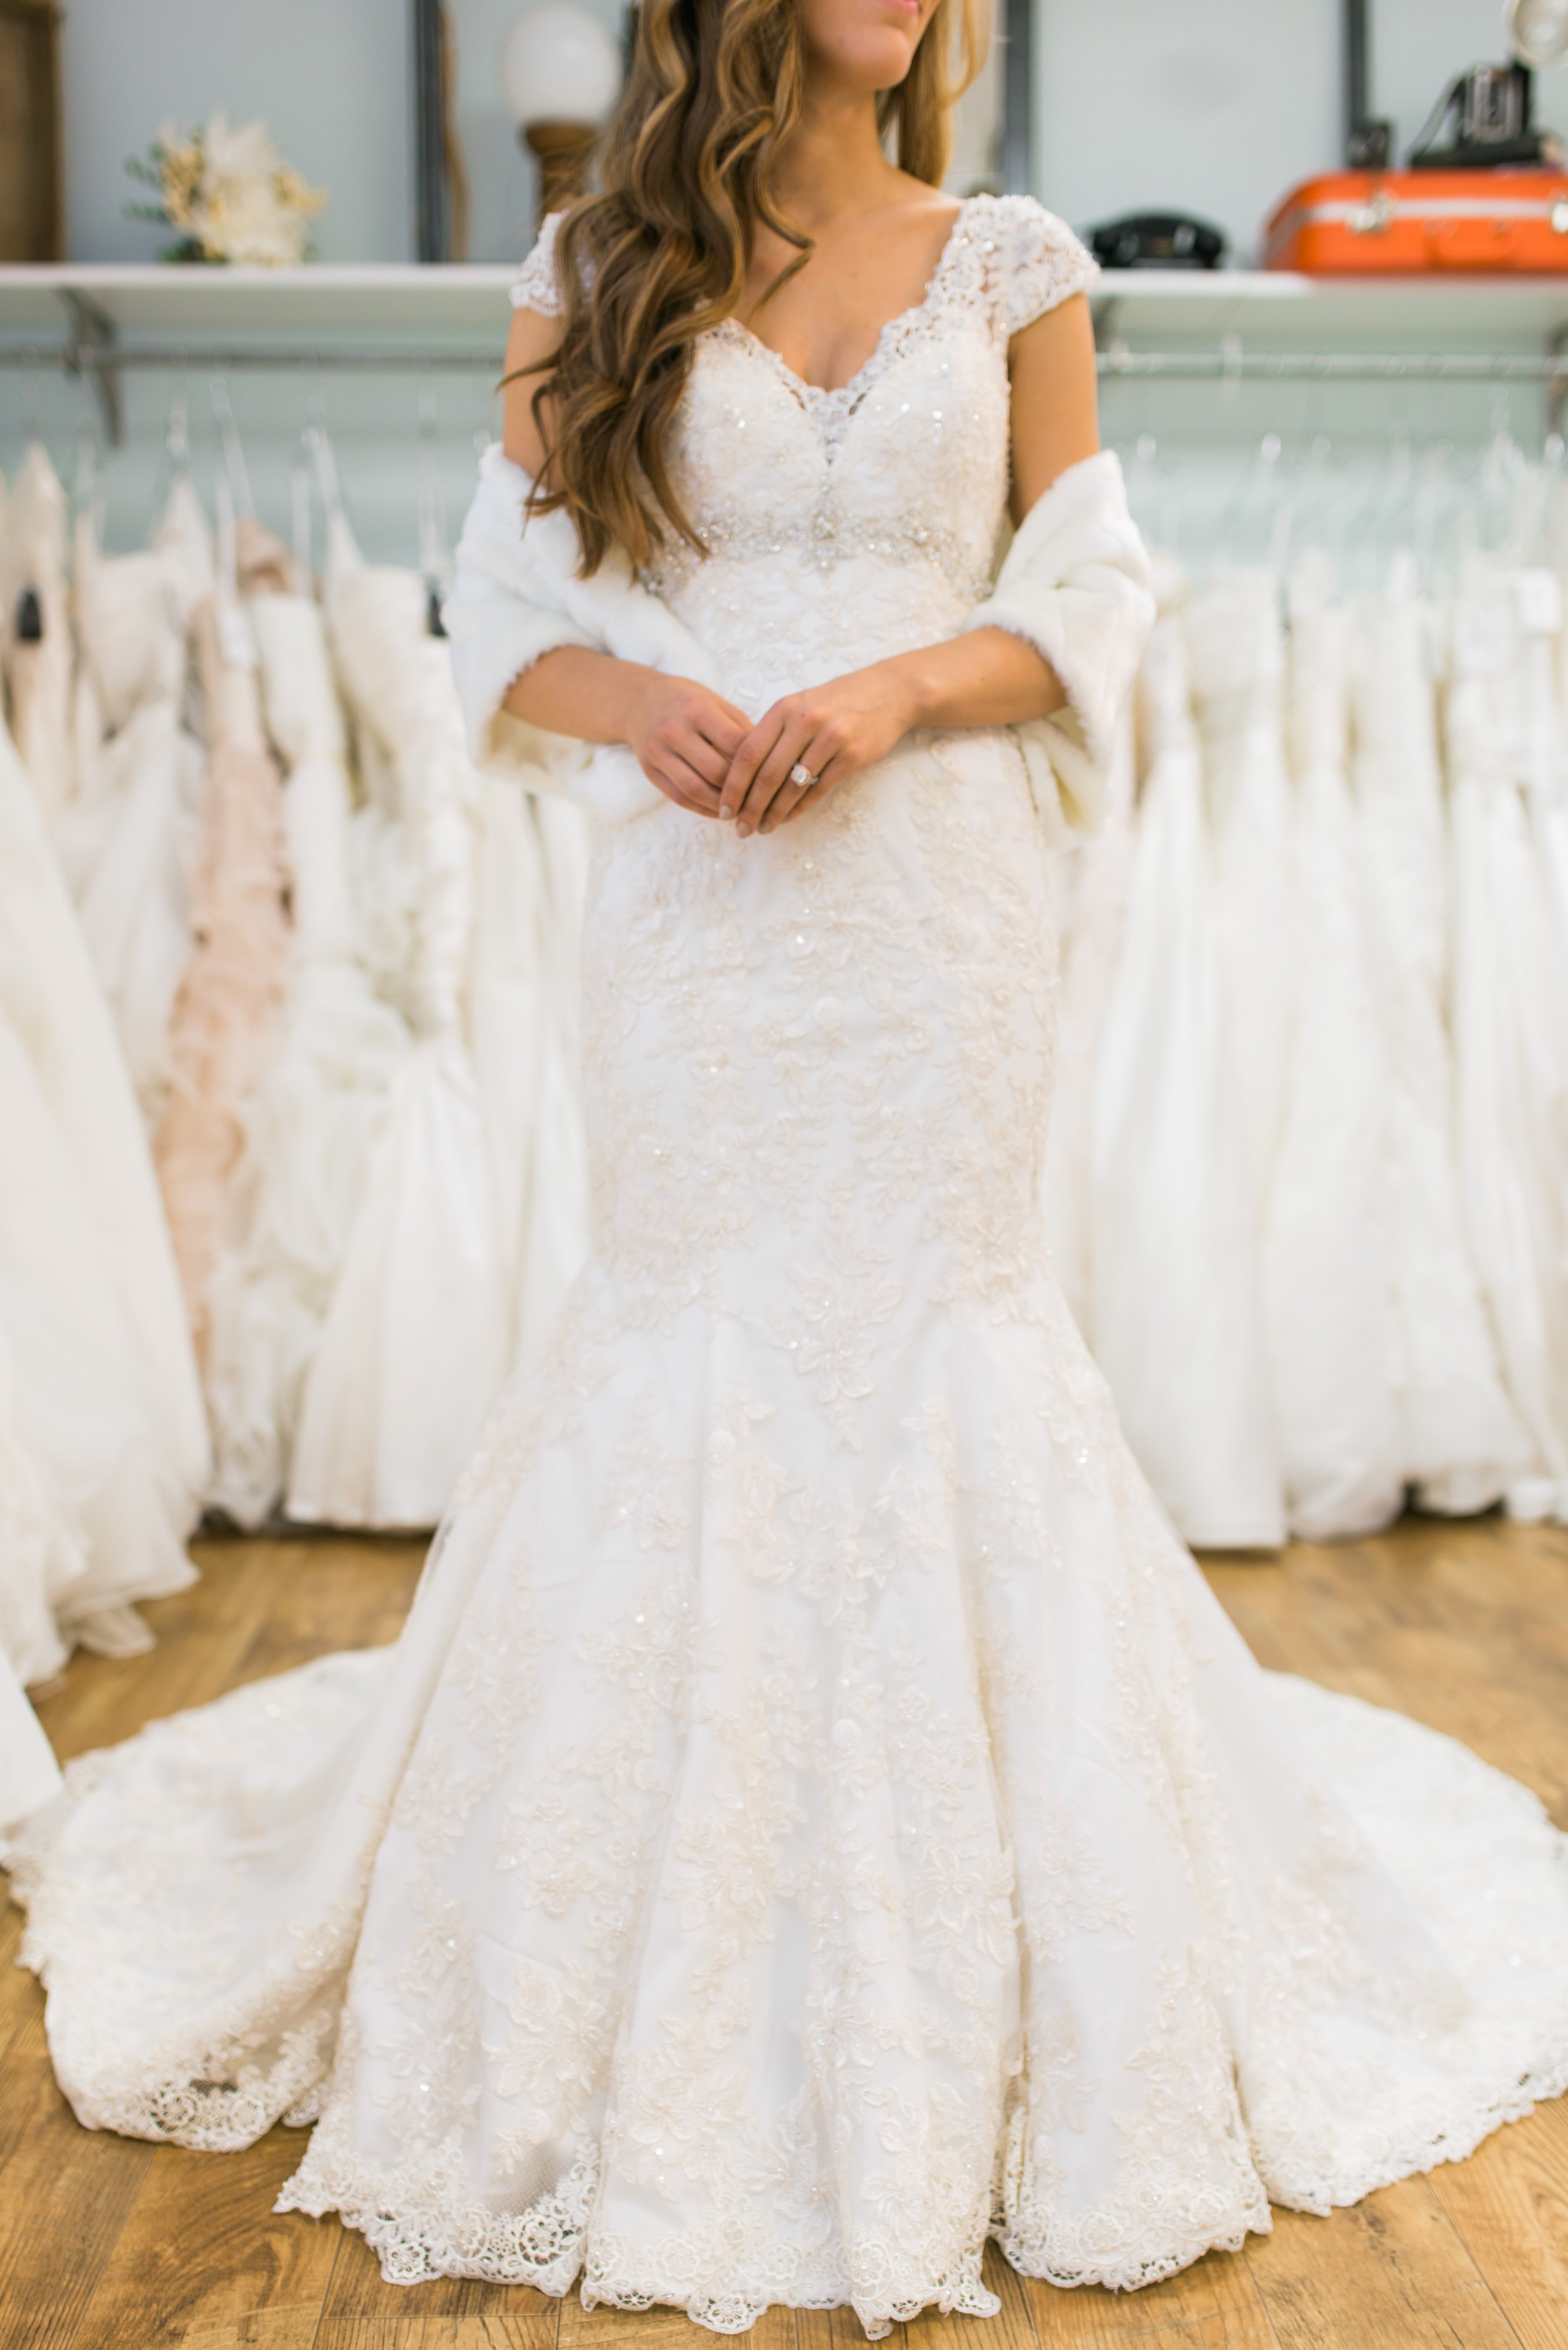 View More: http://everlastinglovephotography.pass.us/pure-bridal